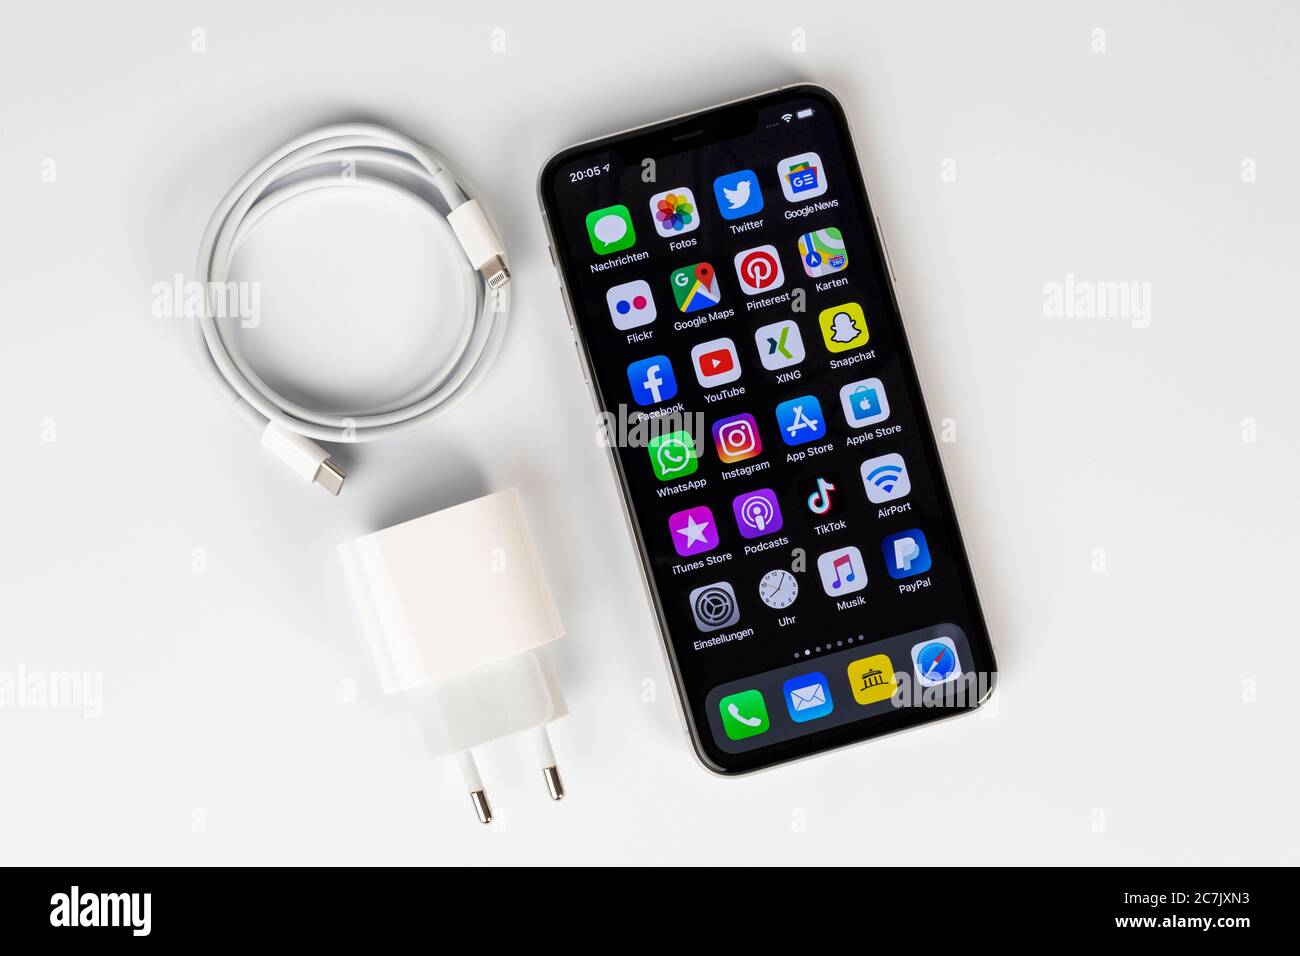 Apple iPhone 11 Pro display, apps, programs, Apple cable, USB-C 18W power adapter, white background Stock Photo Alamy